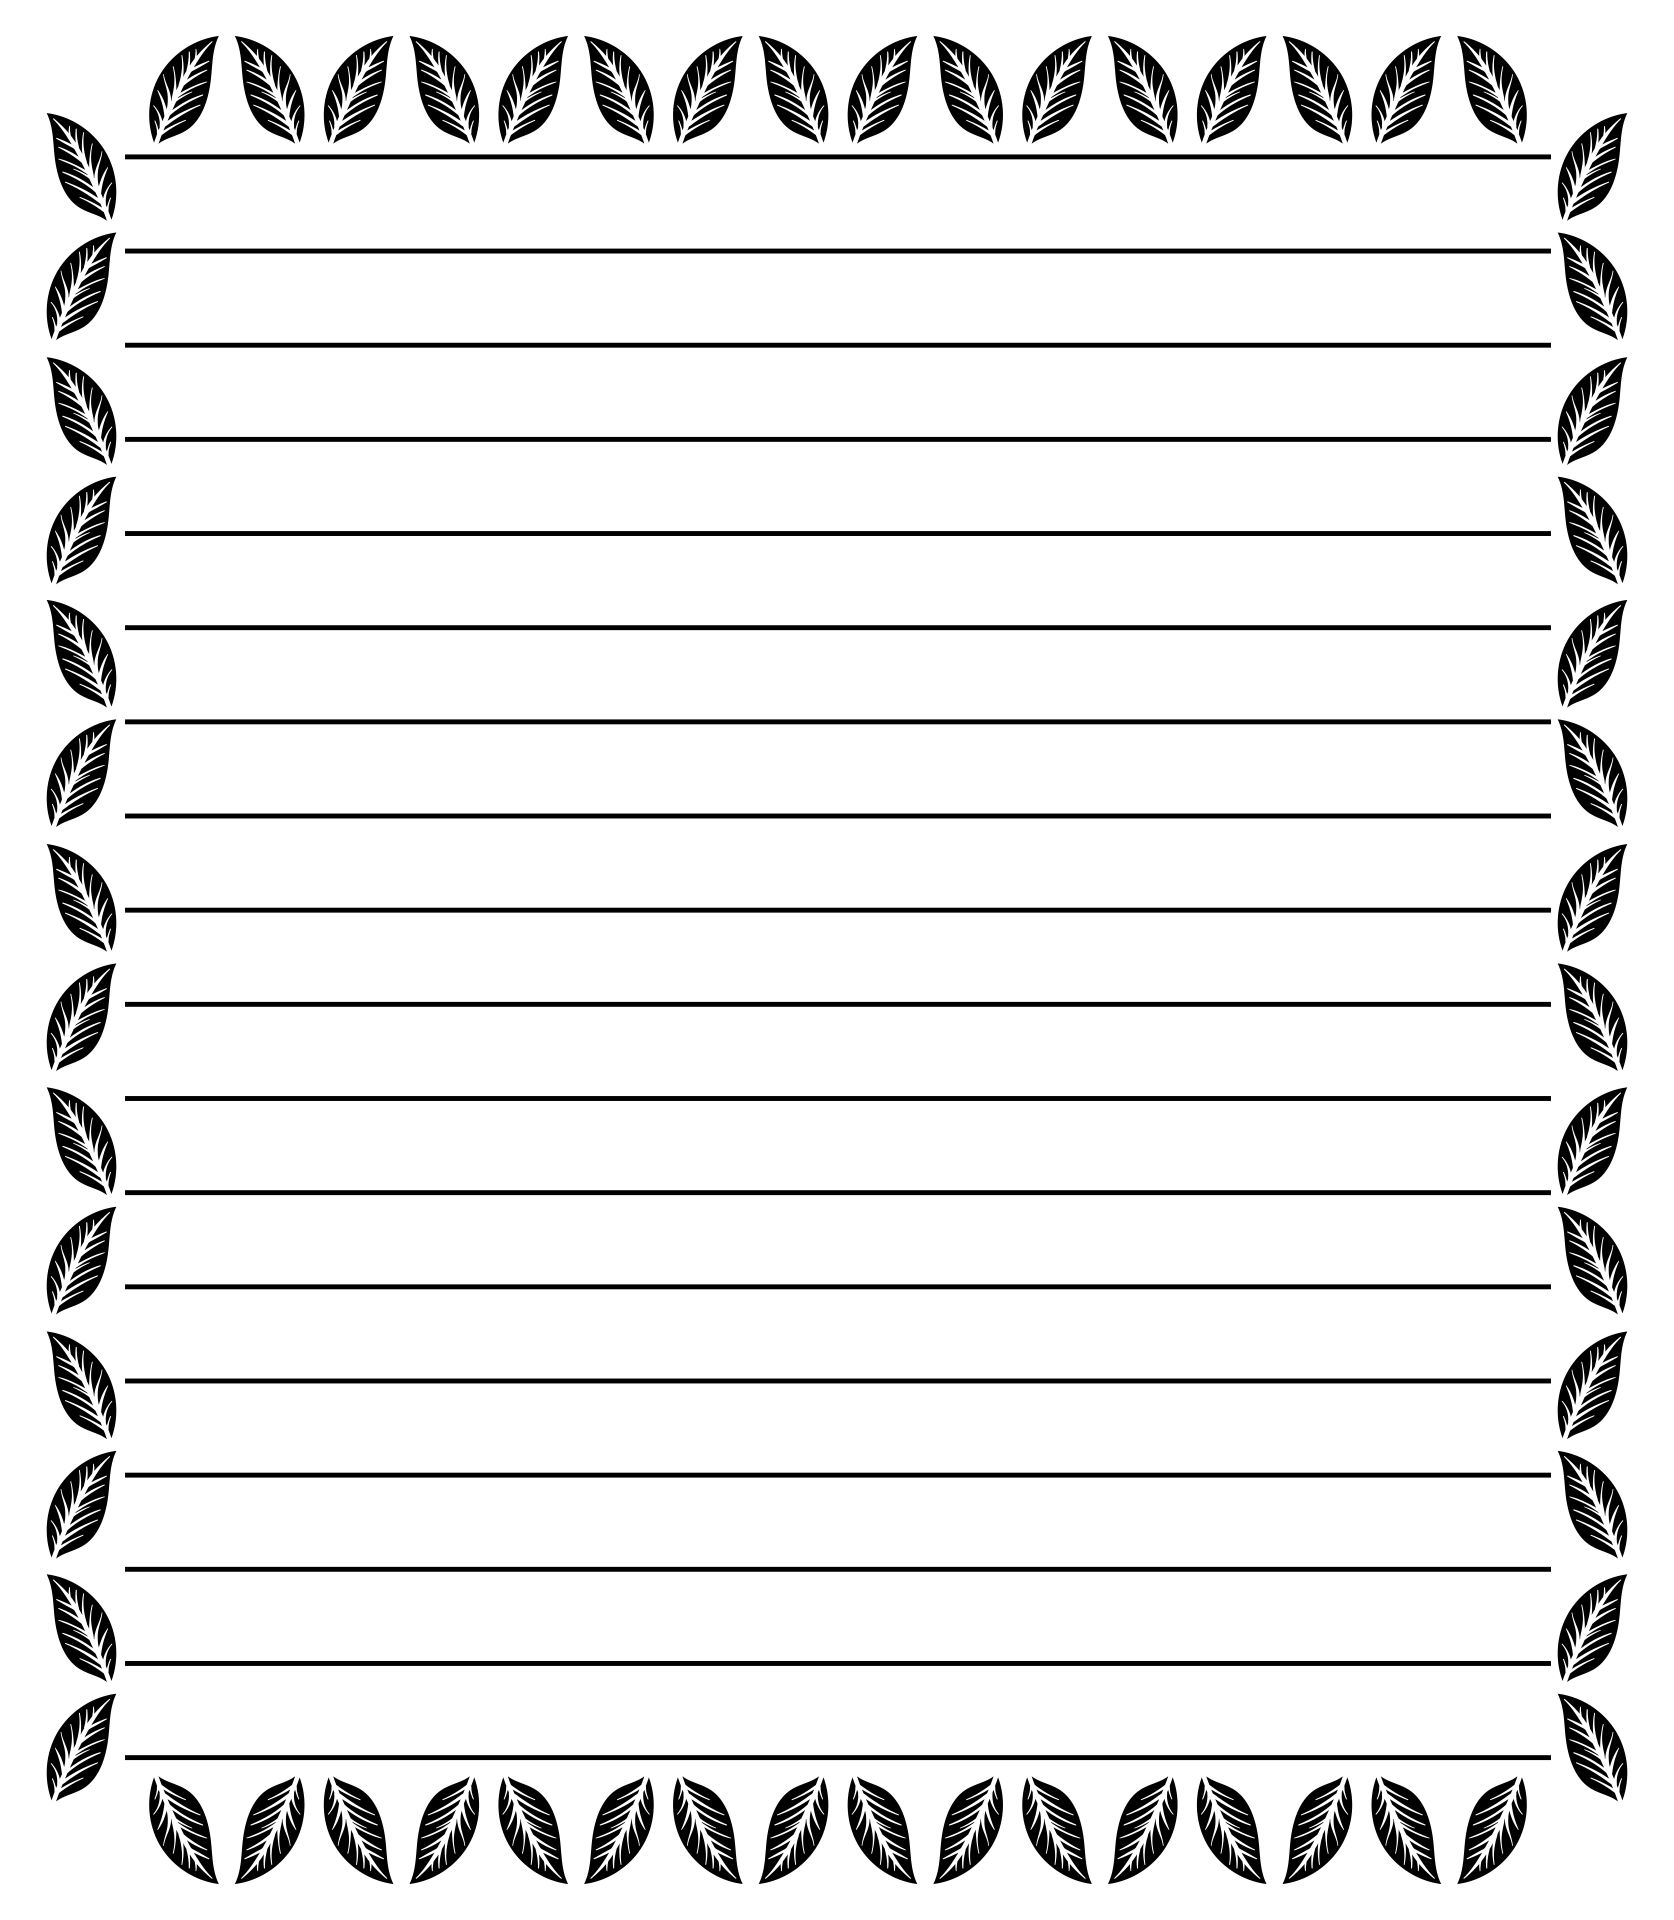 Printable Lined Stationery Paper Black and White